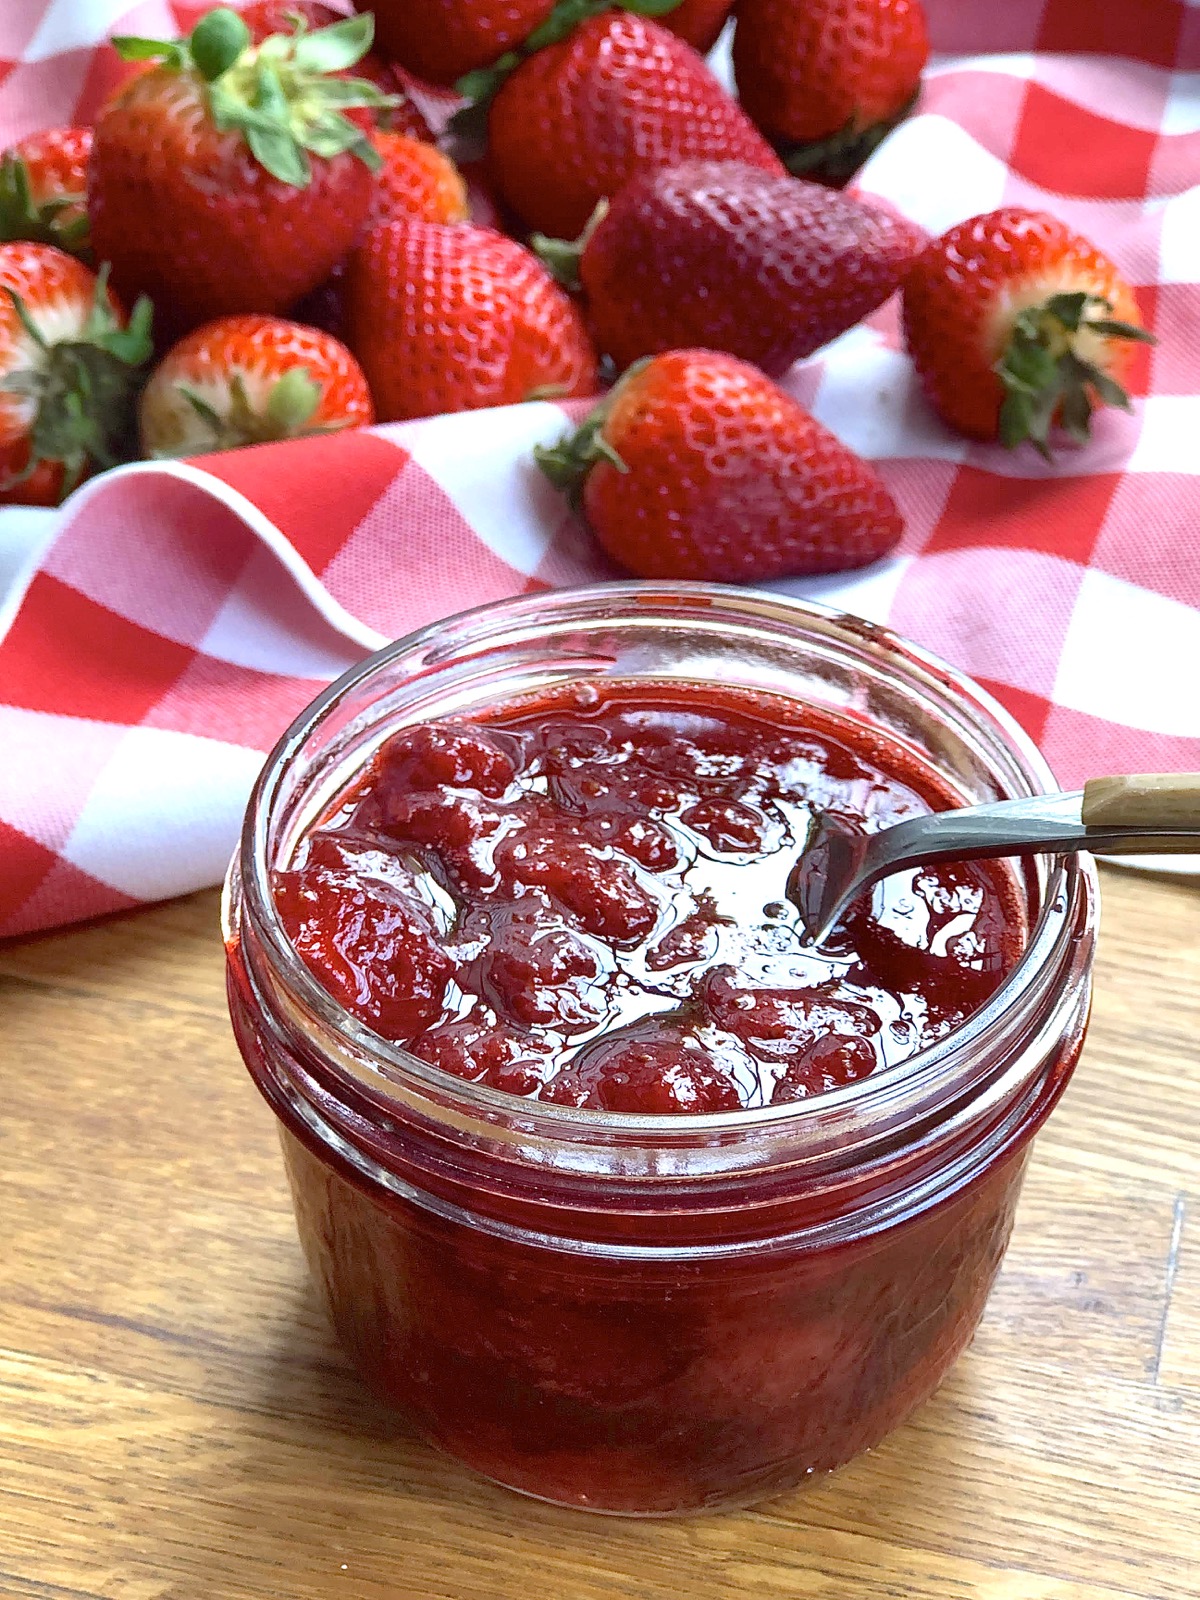 Mason jar of strawberry jam with spoon, fresh berries in the background.